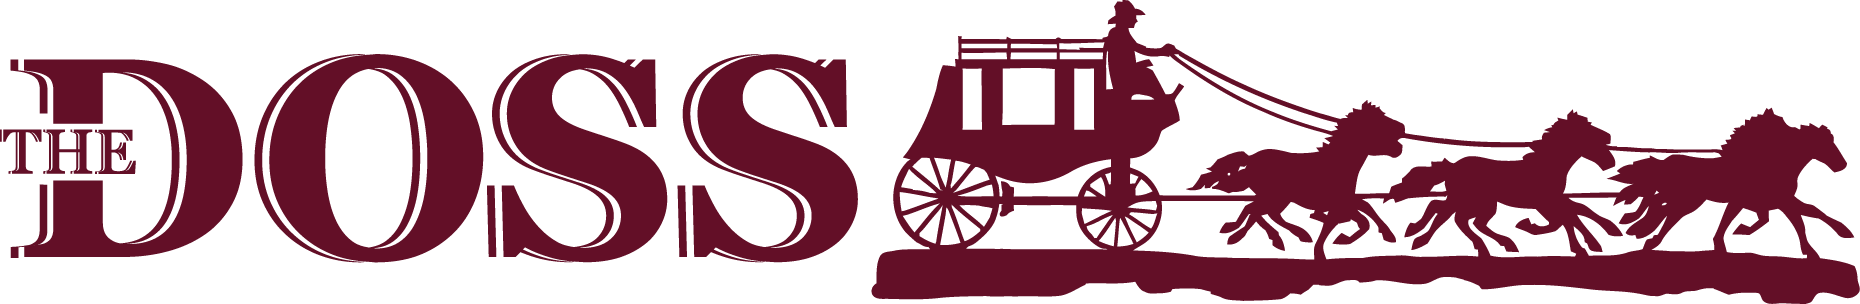 pioneer clipart wooden wagon